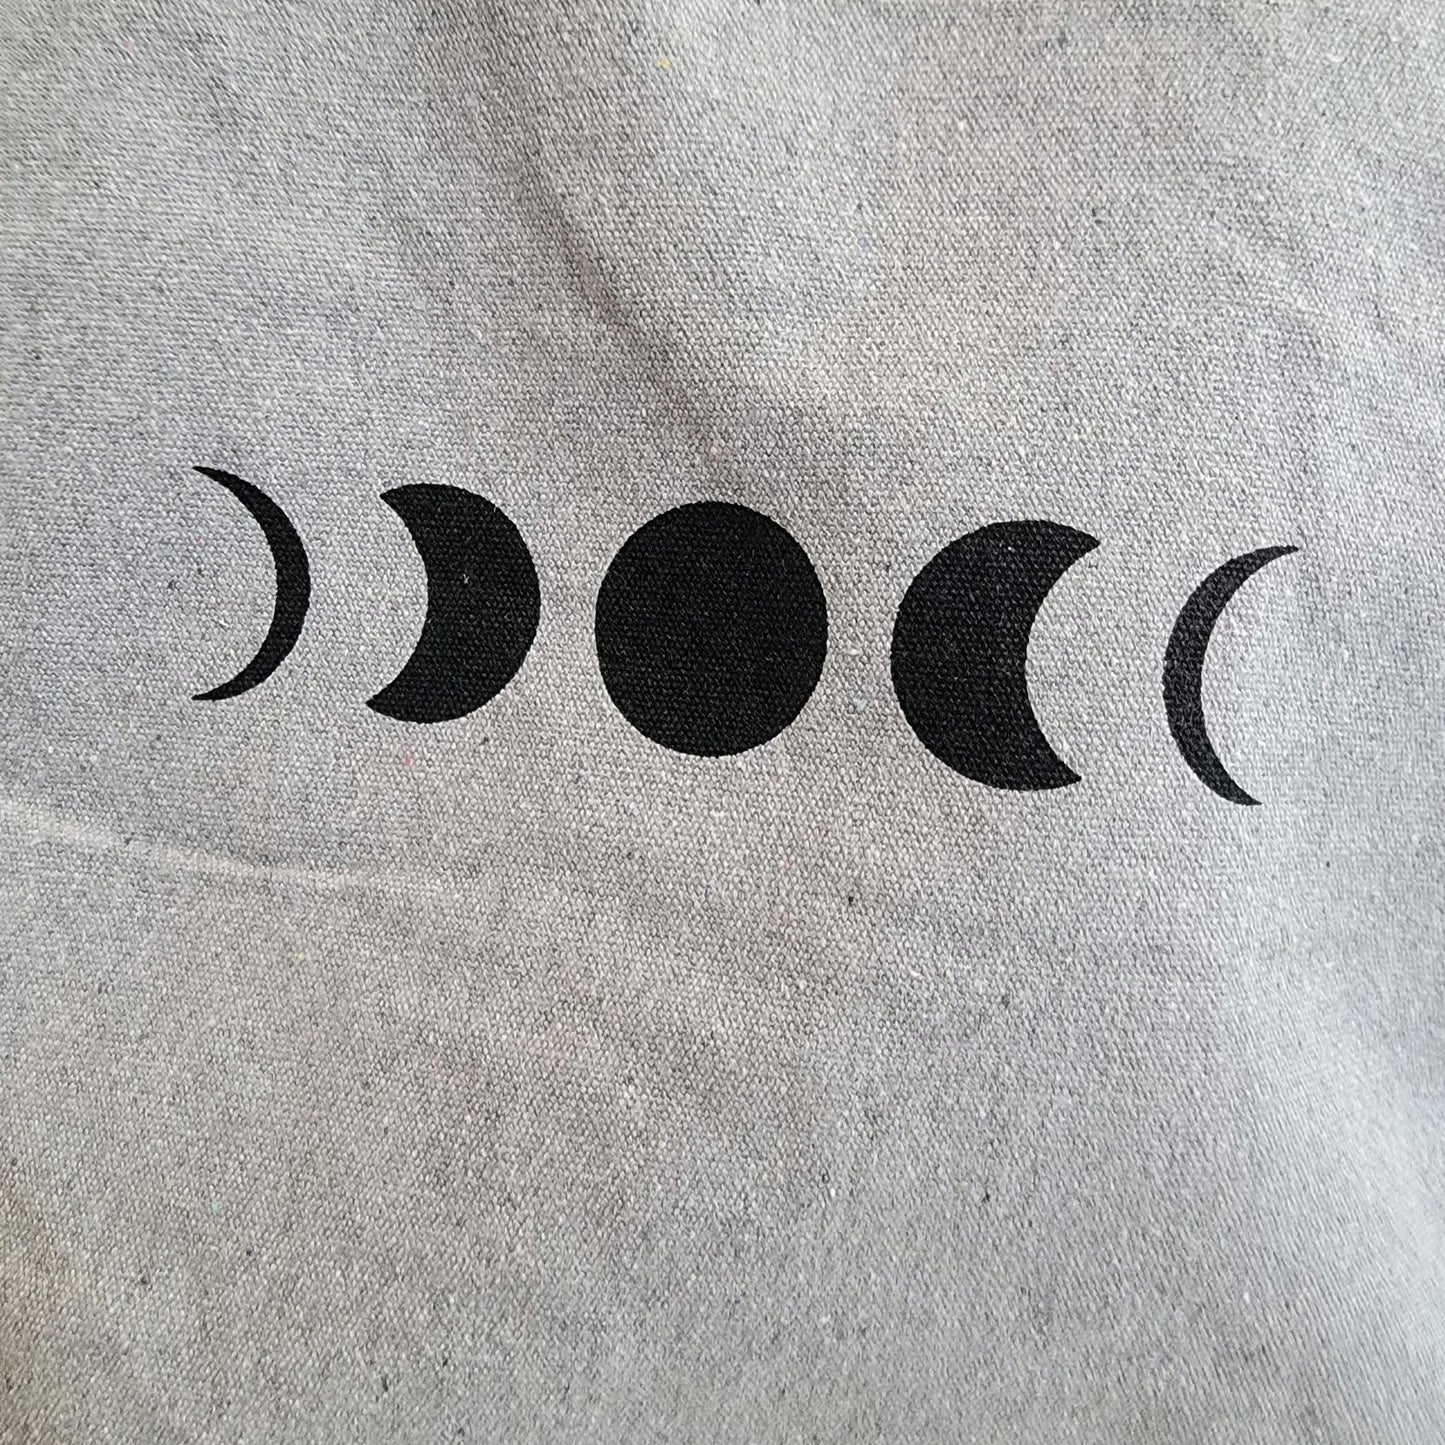 Moon Phases Recycled Canvas Tote Bag - Light Grey with Black Ink - Print Image Shot